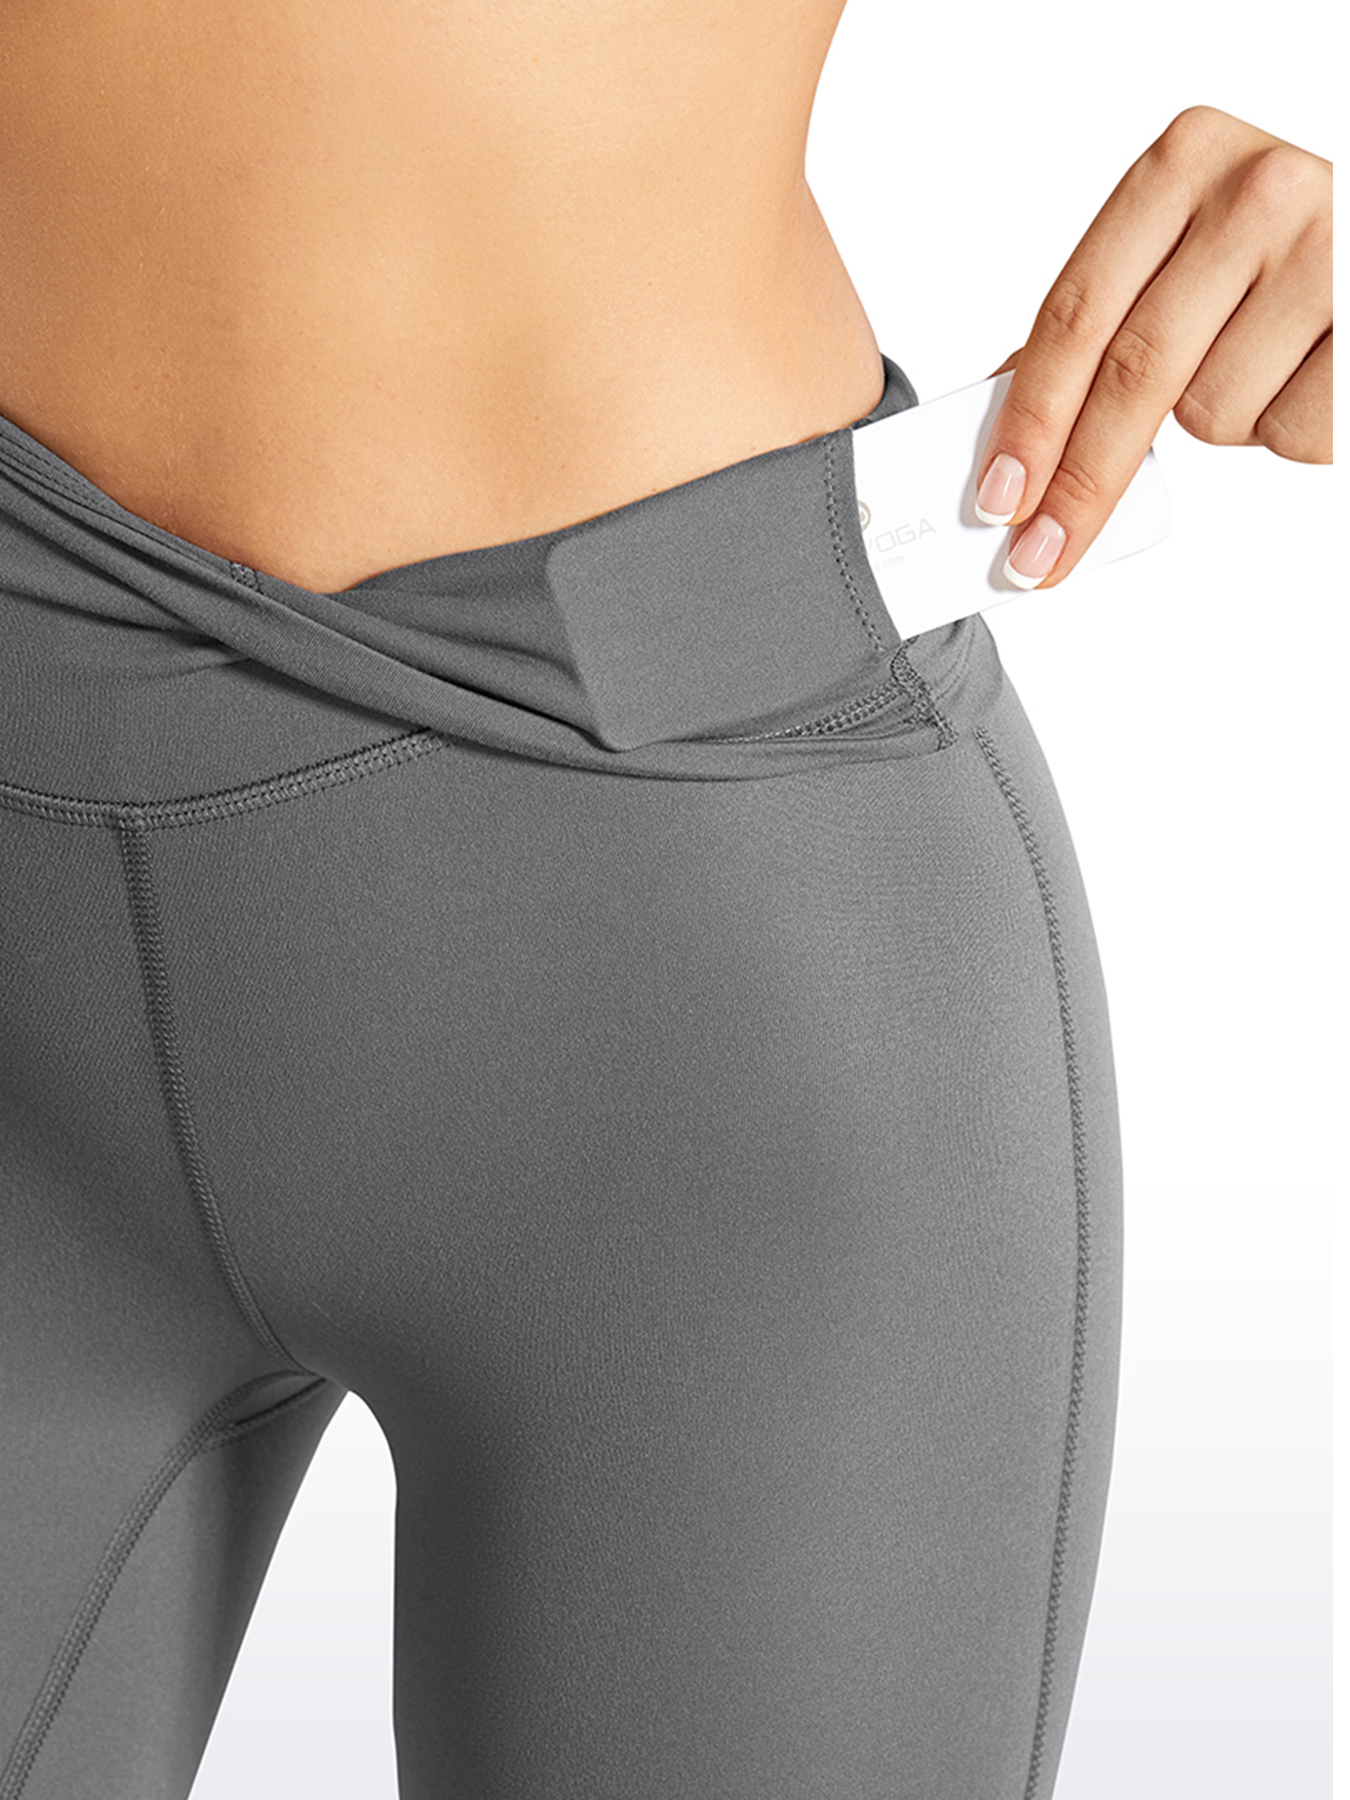 Customer reviews of thick high waist yoga pants #finds # #